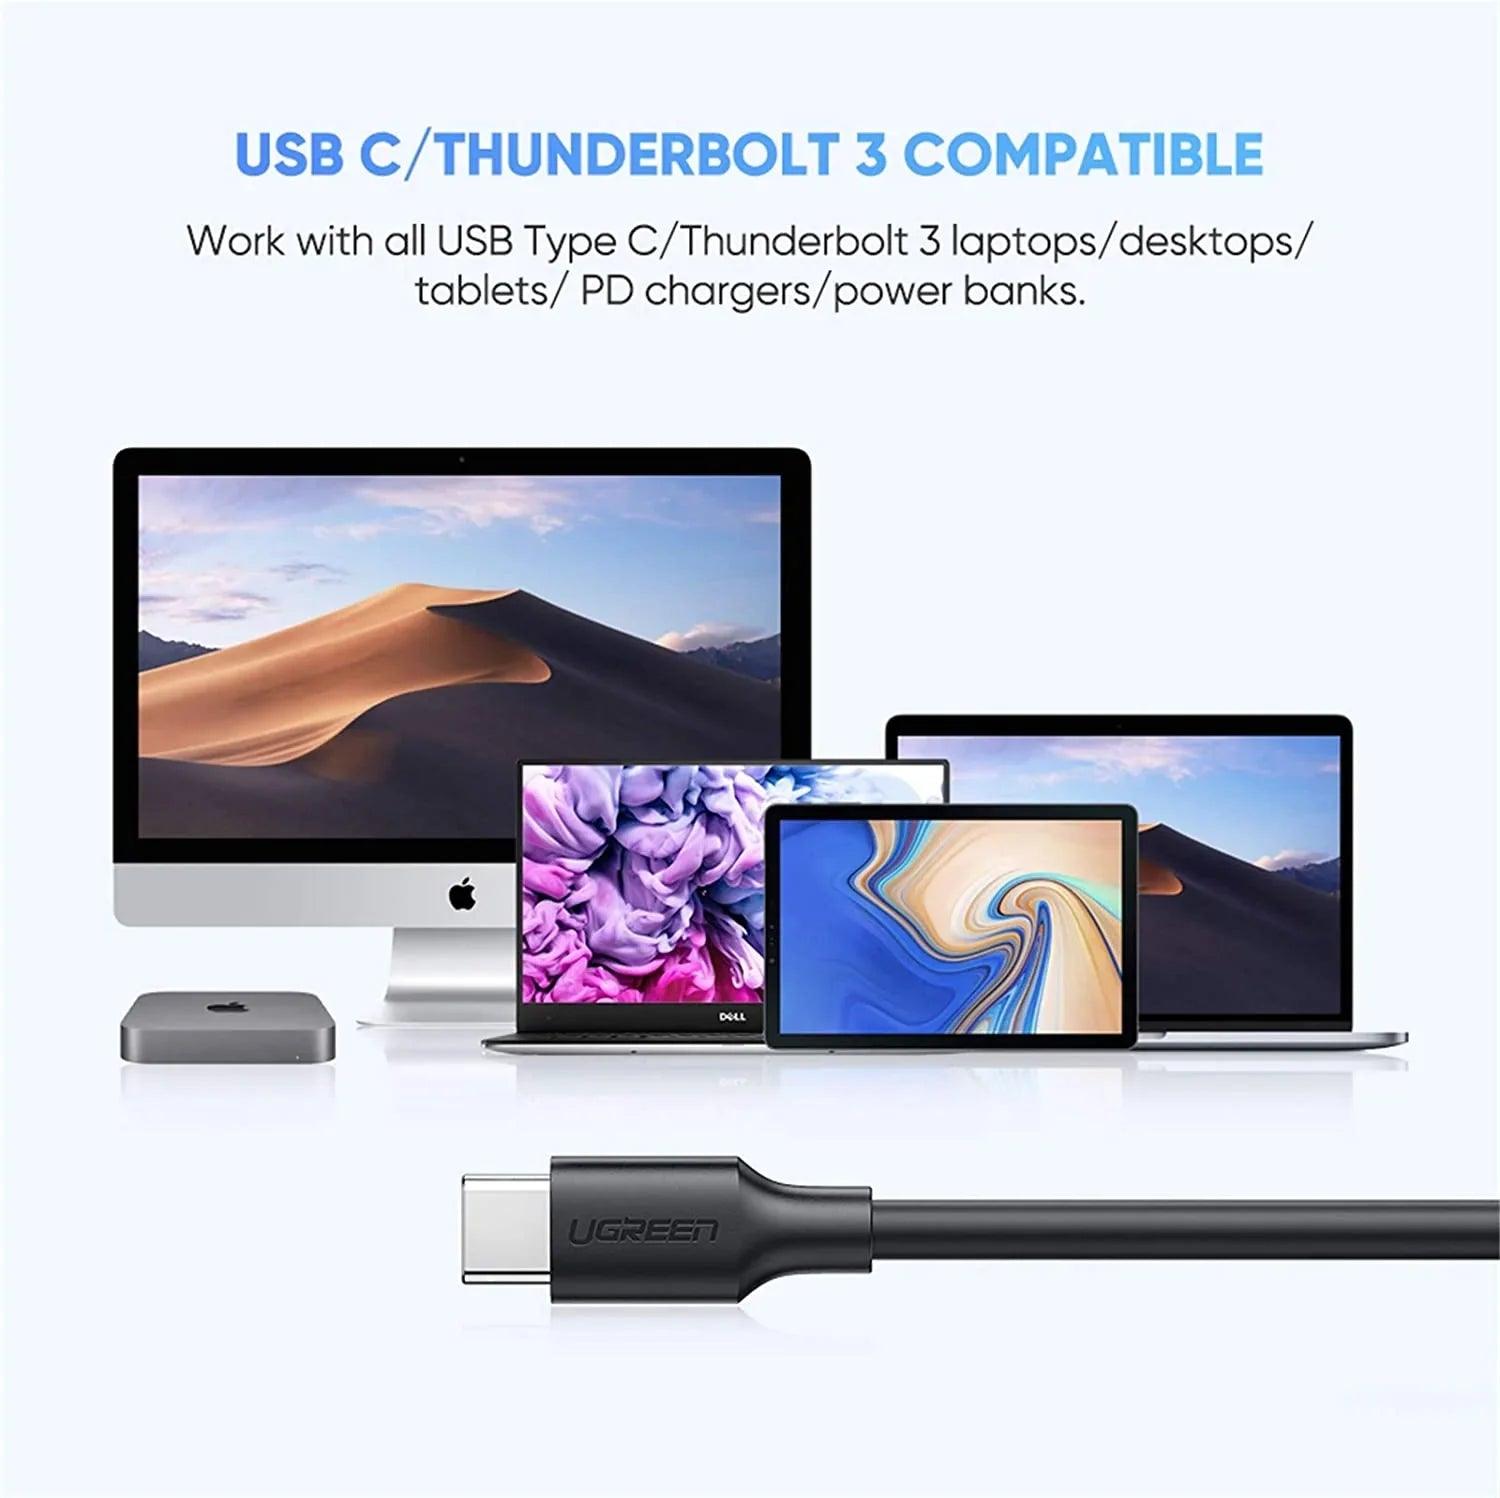 UGREEN USB C Hard Drive Cable, Micro B to Type C Lead Compatible with USB 3.0 External Portable - ADYASTORE casablanca maroc